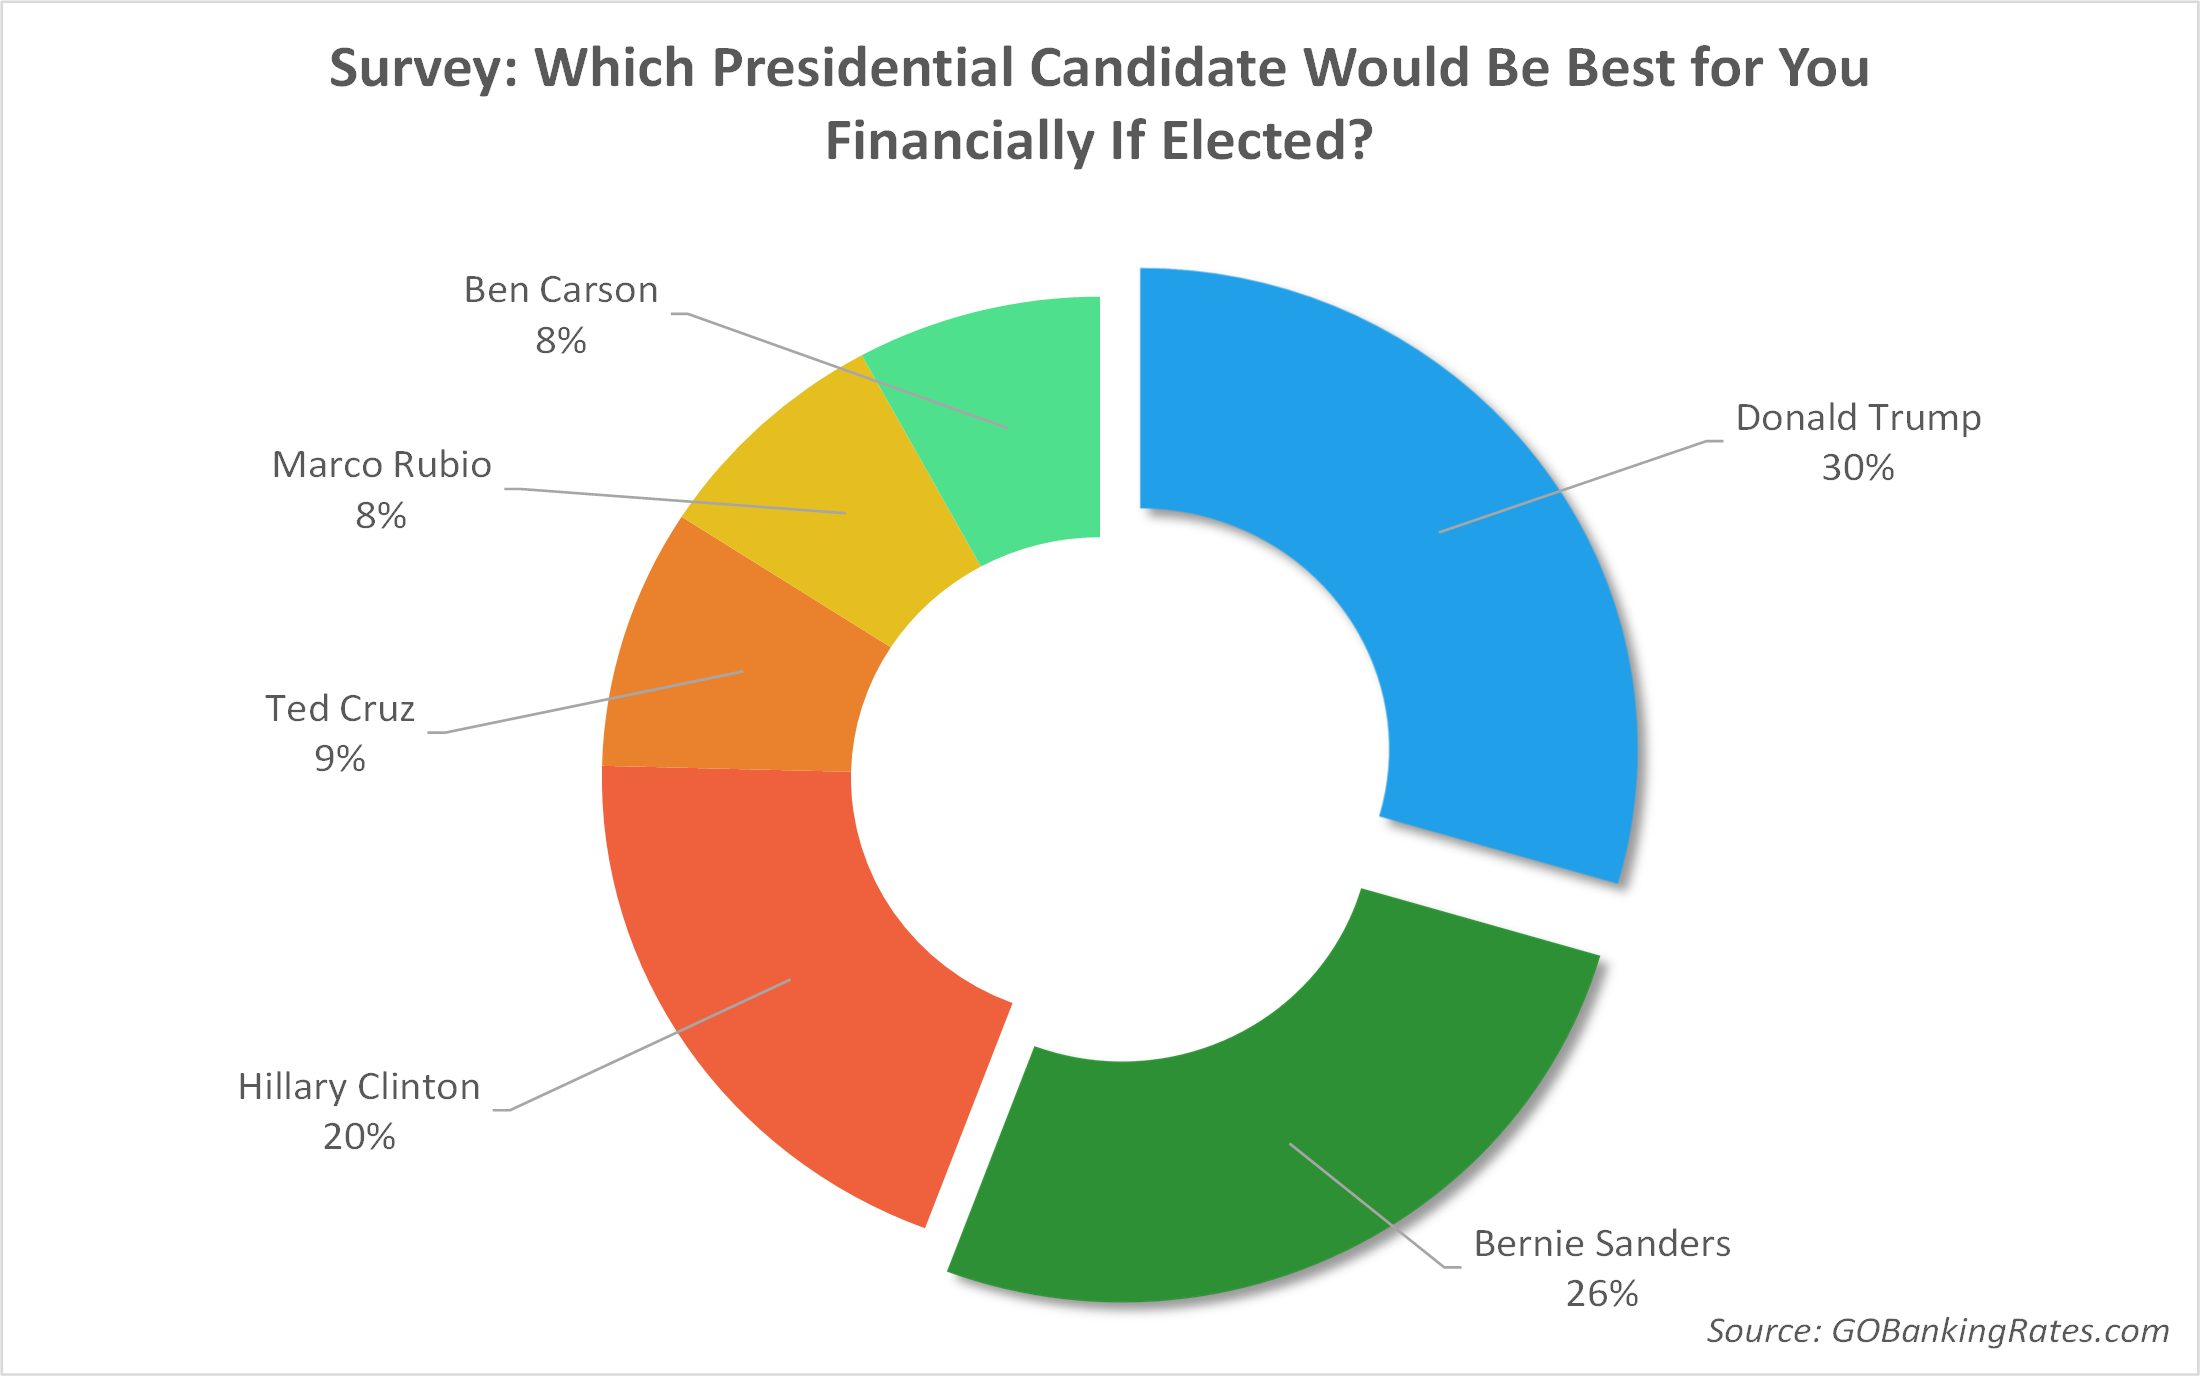 Survey: Which Presidential Candidate Would Be Best for You Financially If Elected?